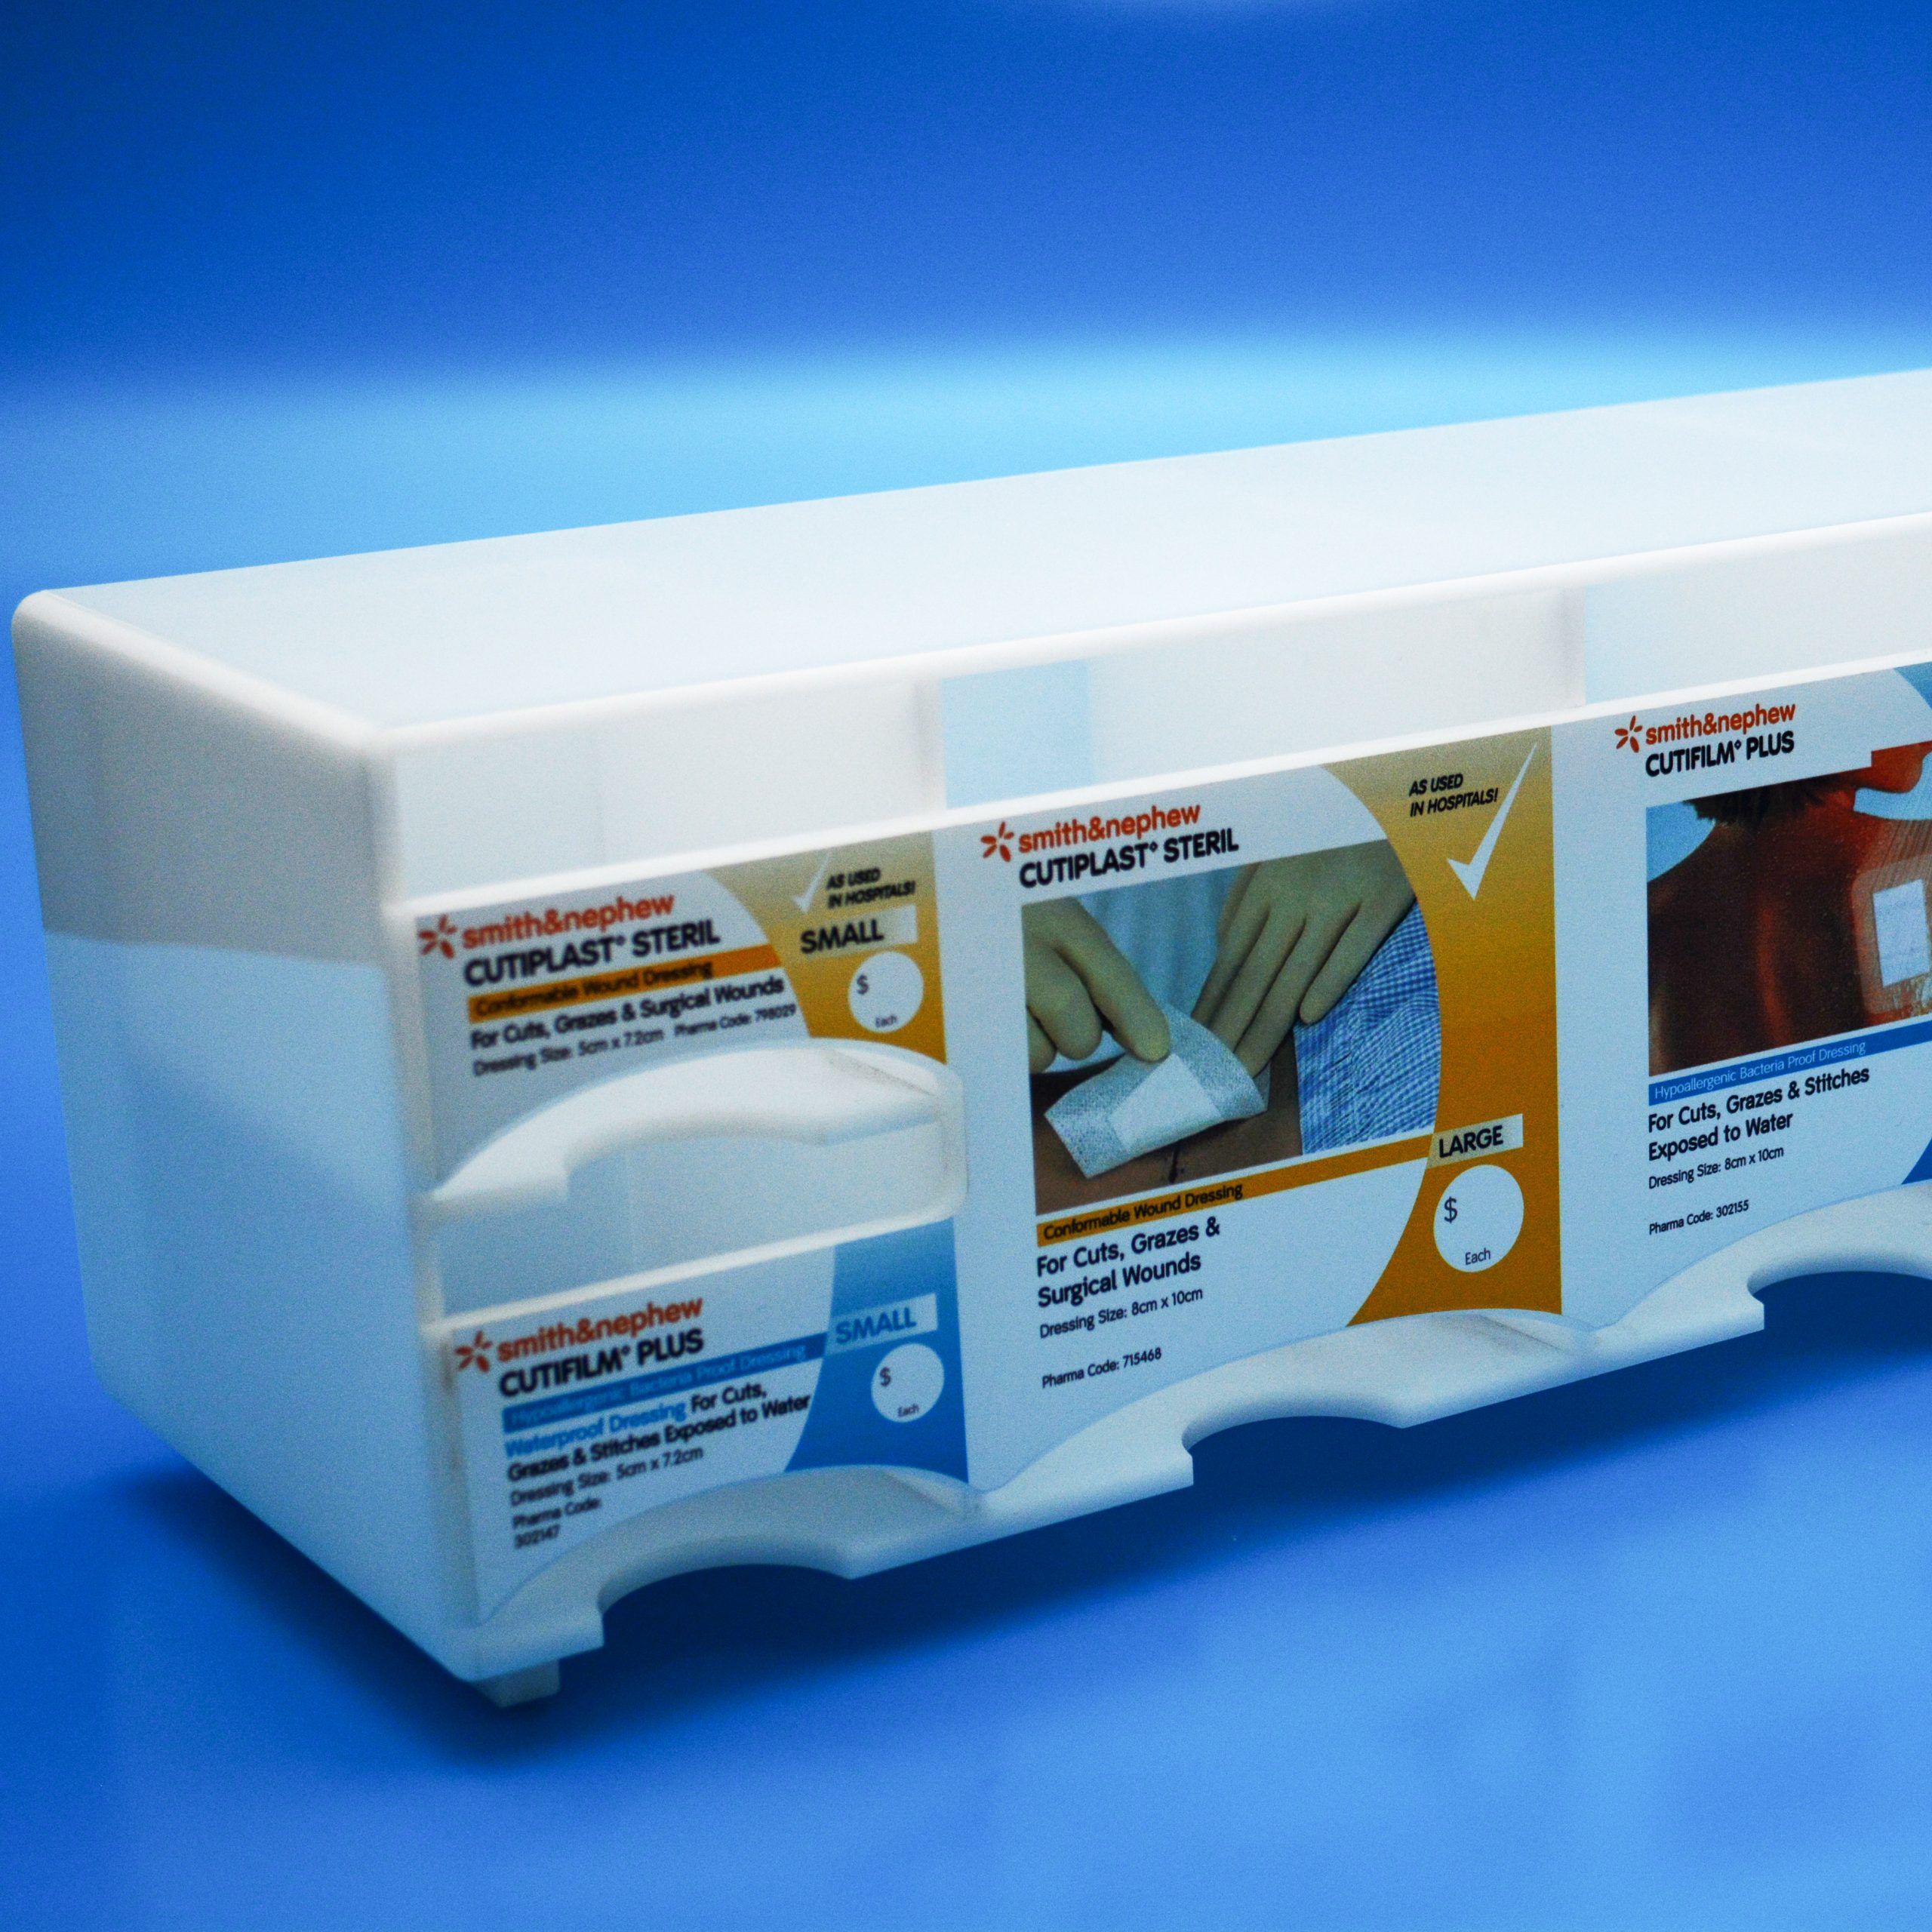 Pharmaceutical Display - Drop Feeder Design in opal acrylic with sections for different wound care products